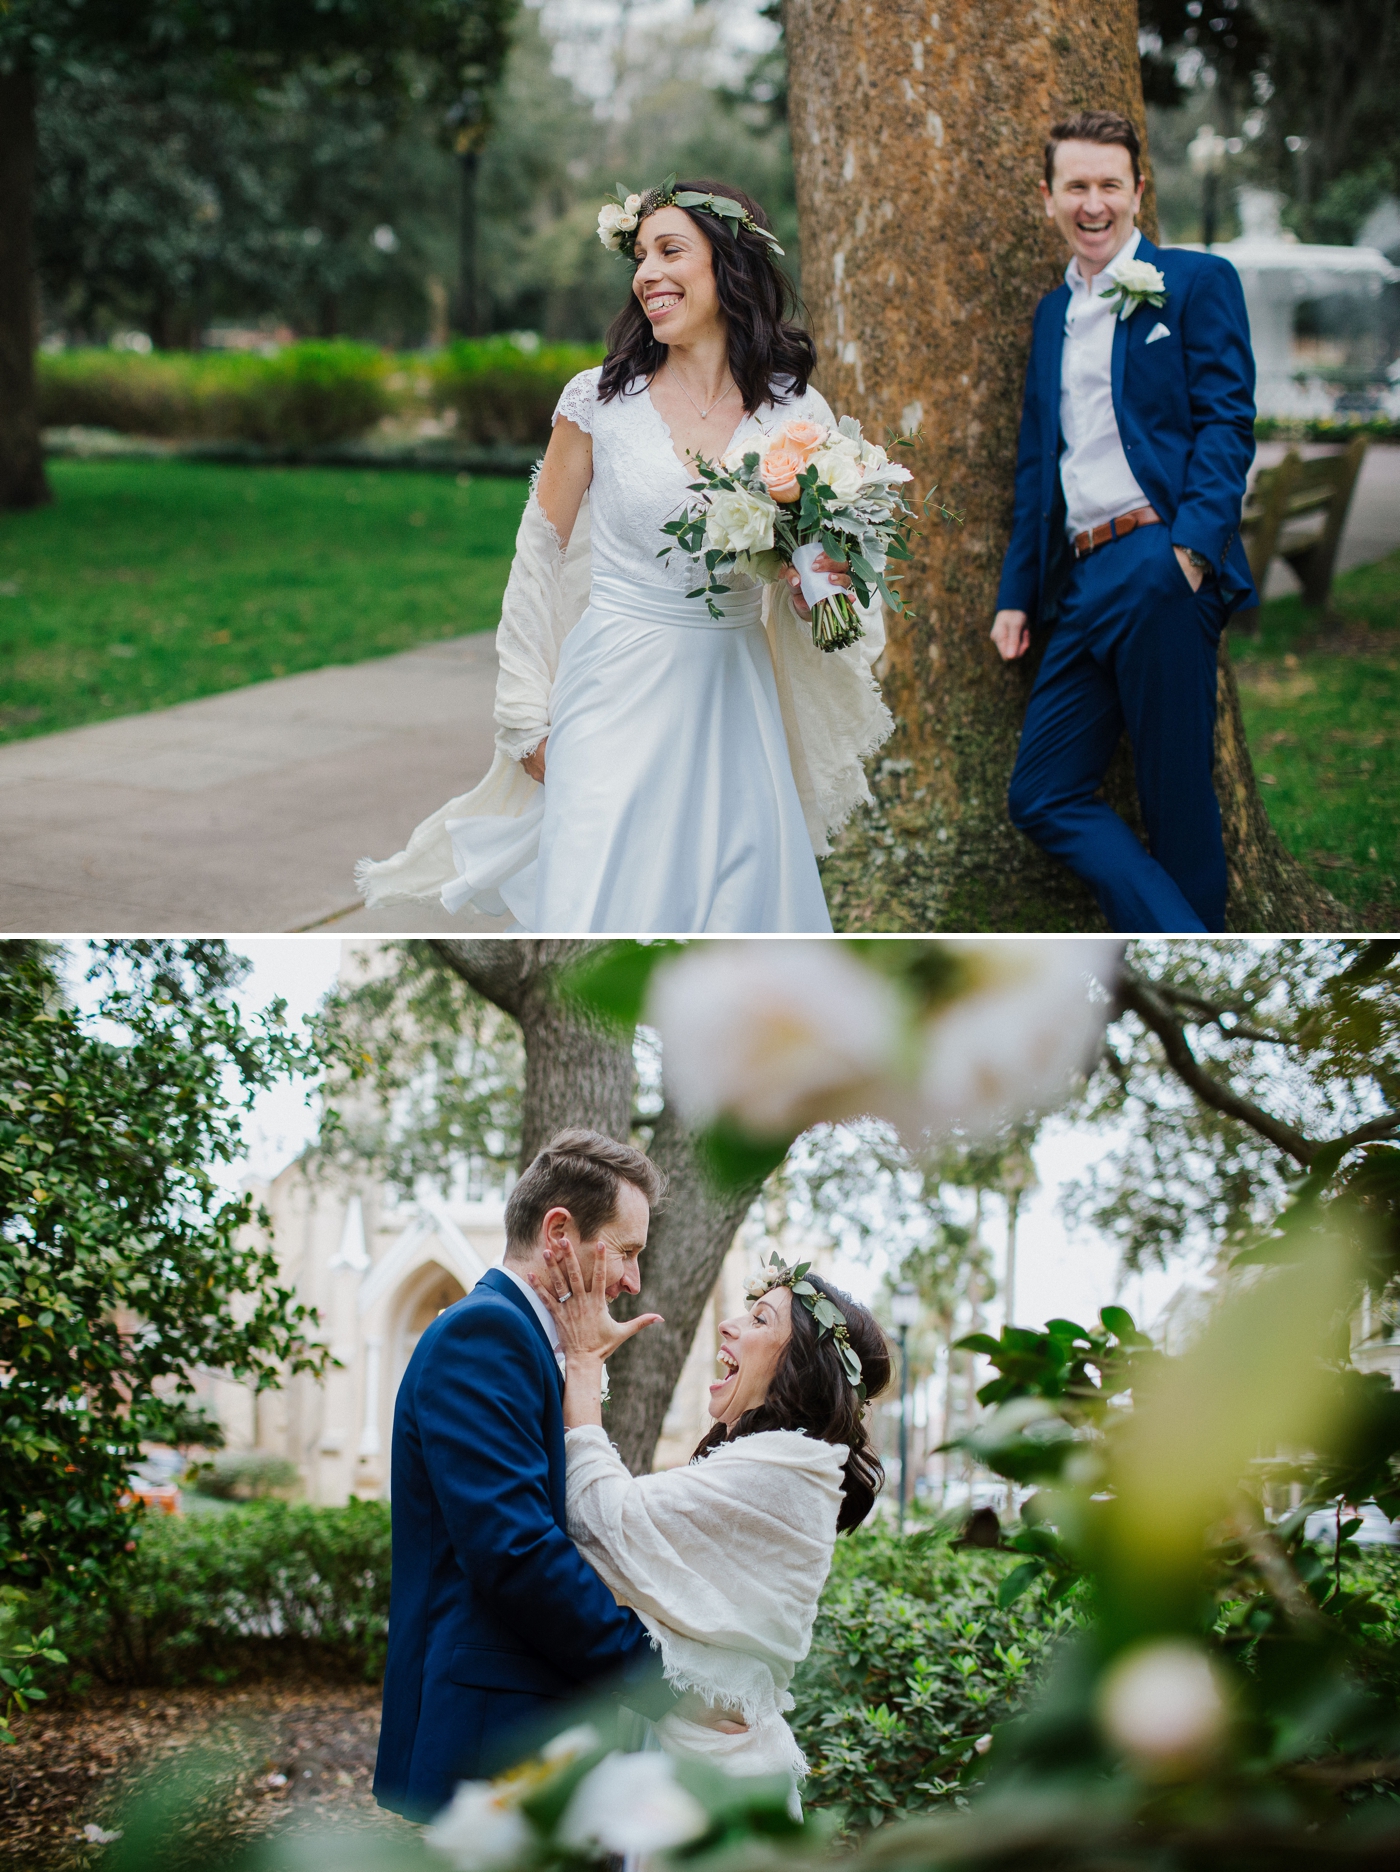 Savannah elopement photography by Izzy and Co.